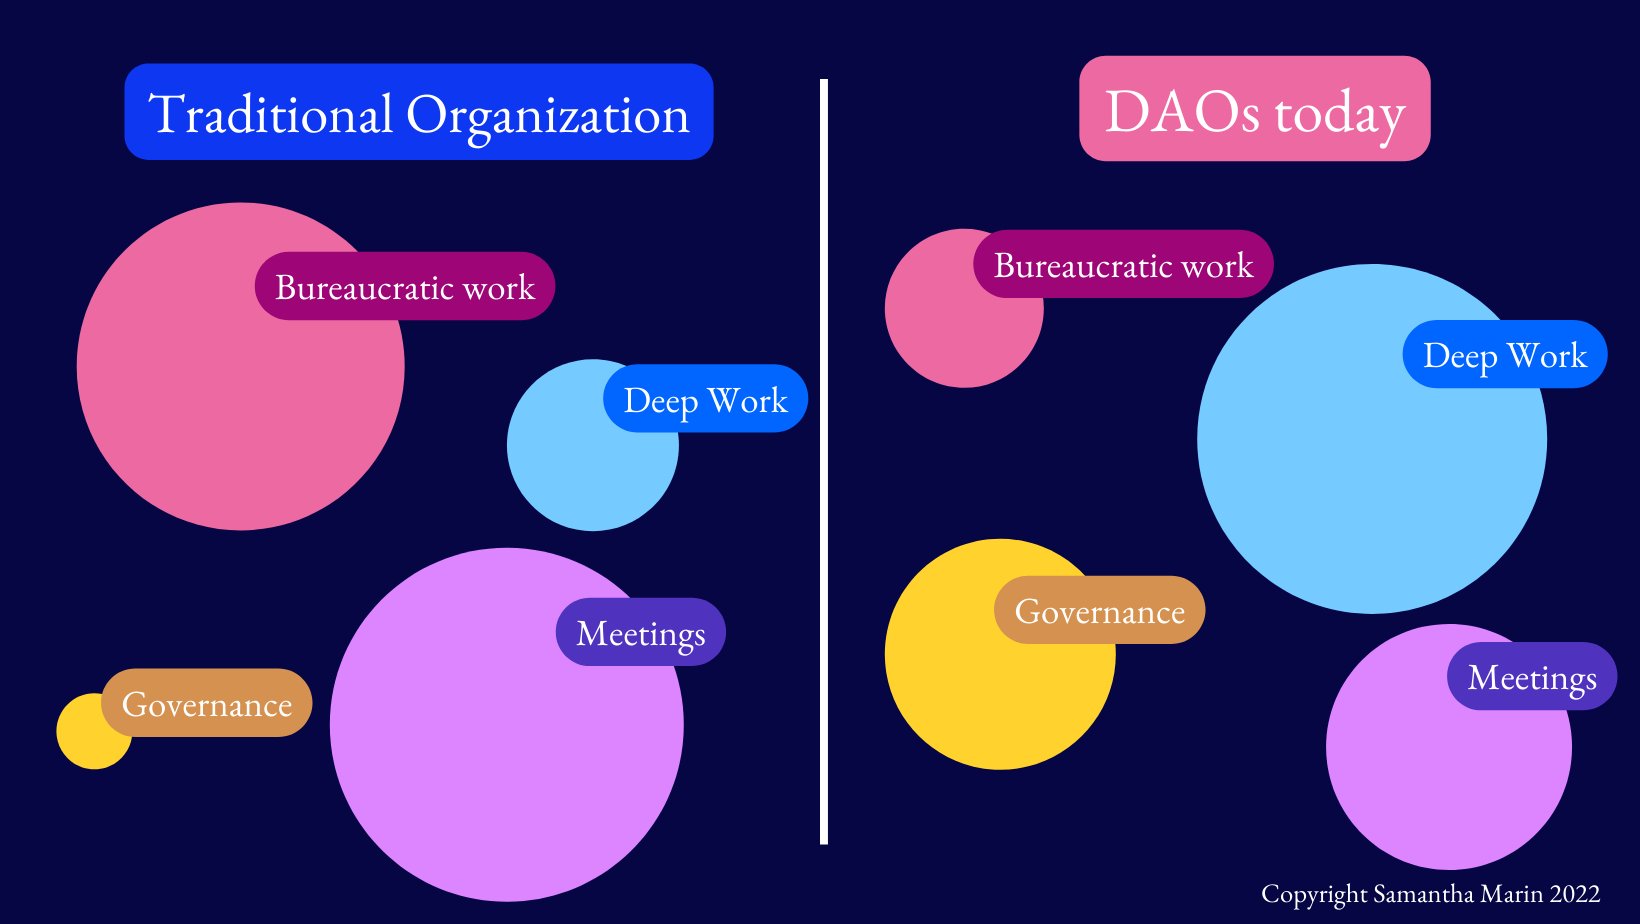 Time spent in the workday of a traditional org vs. a DAO today. This is a rough outline based on my experience working in both DAOs and traditional organizations—no hard-and-fast numbers.